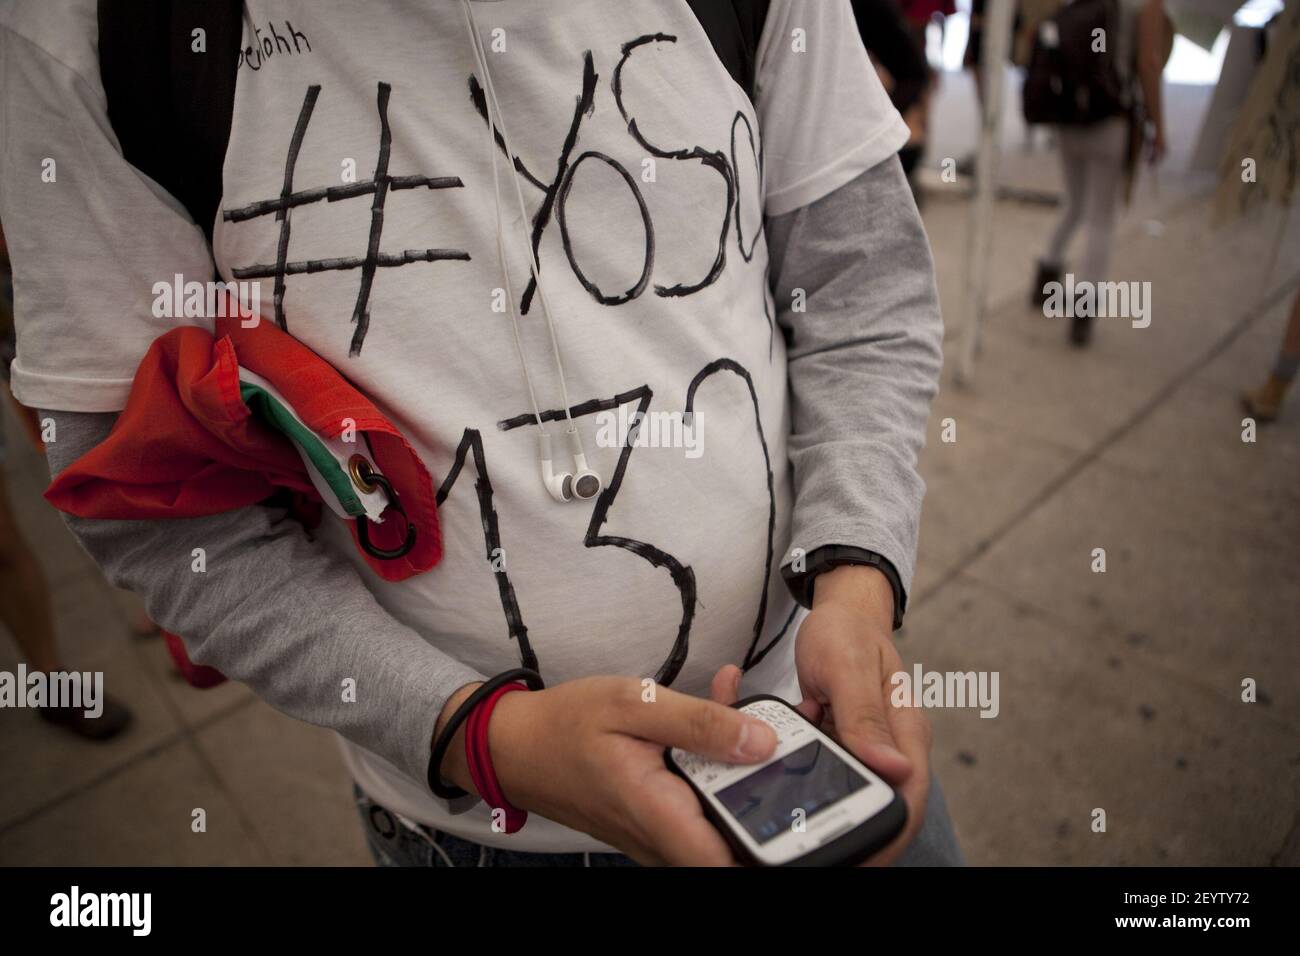 10 June 2012 Ã Mexico City, Mexico Ã An university student members of the new movement 'yo soy 132' (I am 132) uses his cellphone during a protest against Enrique Pena Nieto, presidential candidate of the opposition Institutional Revolutionary Party (PRI) and media censorship in the electoral campaign before the presidential elections of July 1 at the Monument of the Angel of Independence in Mexico City. Photo credit: Benedicte Desrus / Sipa USA Stock Photo